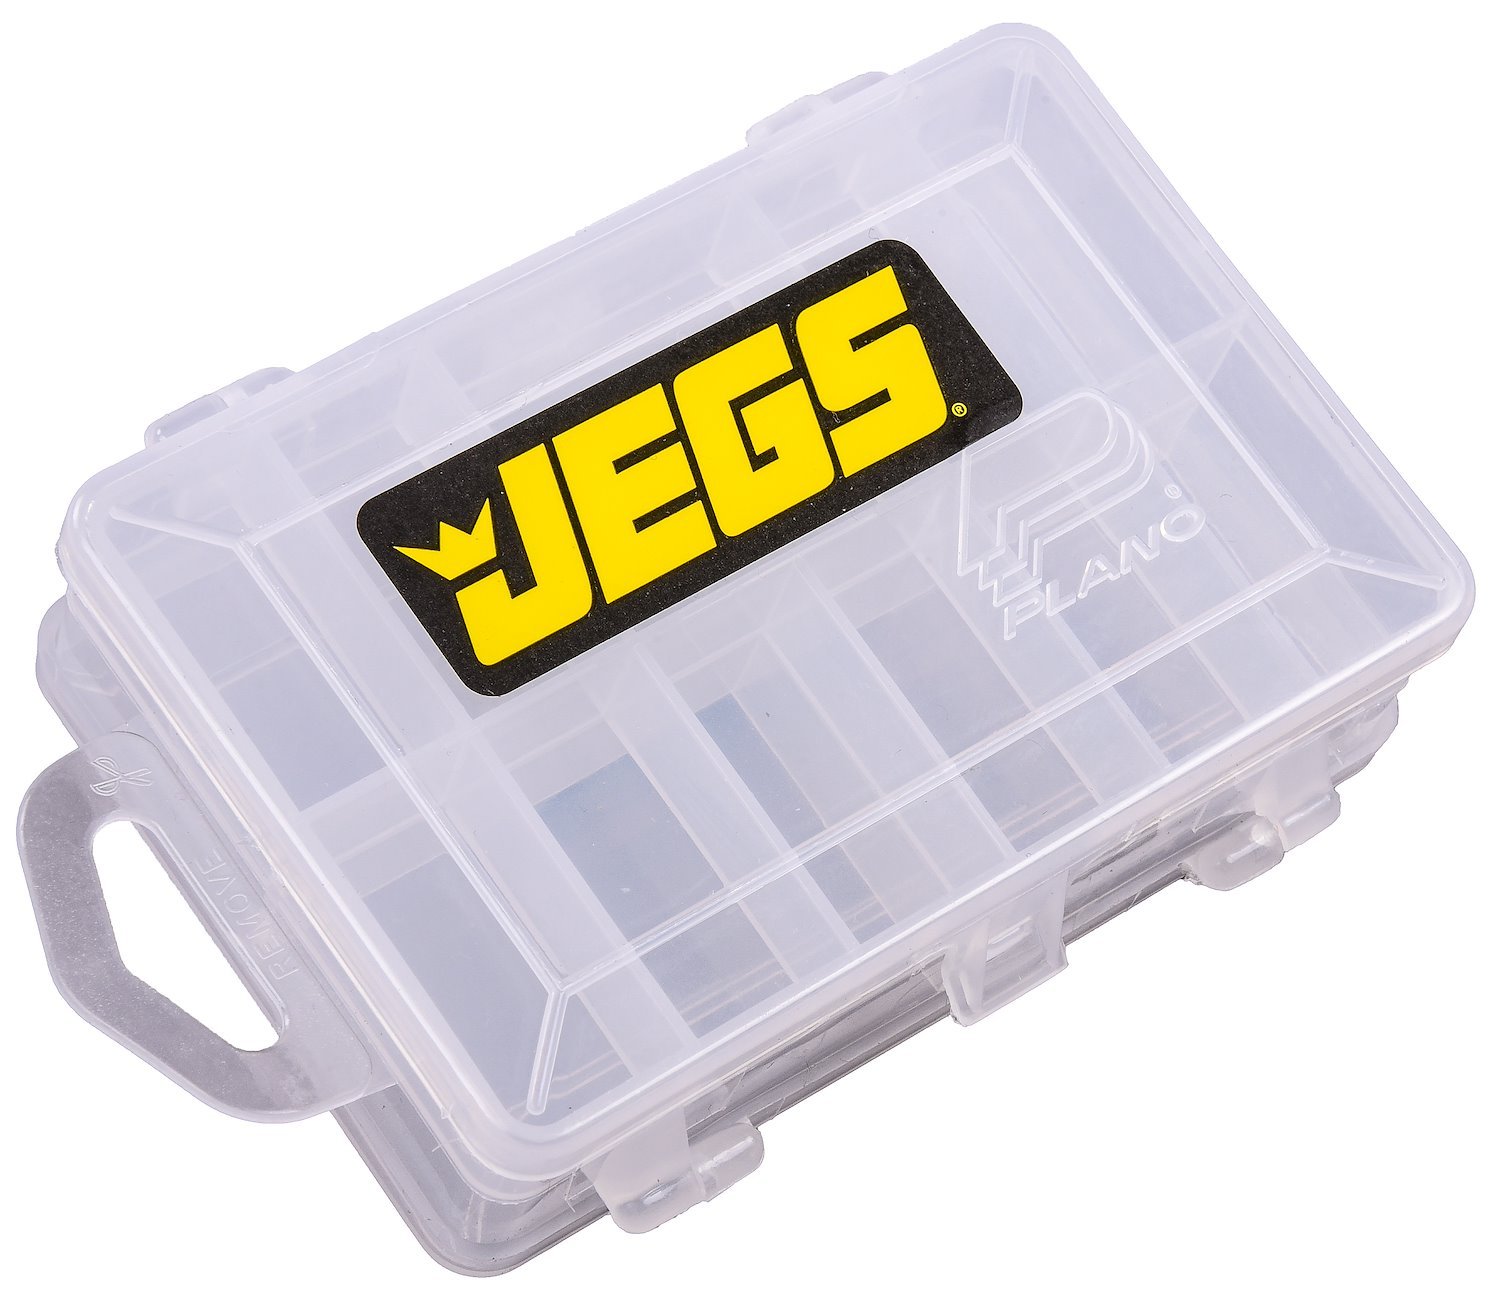 Replacement Standard Main Jet Case [Measures: 4 1/2 in. L x 3 in. W x  1 5/16 in. H]